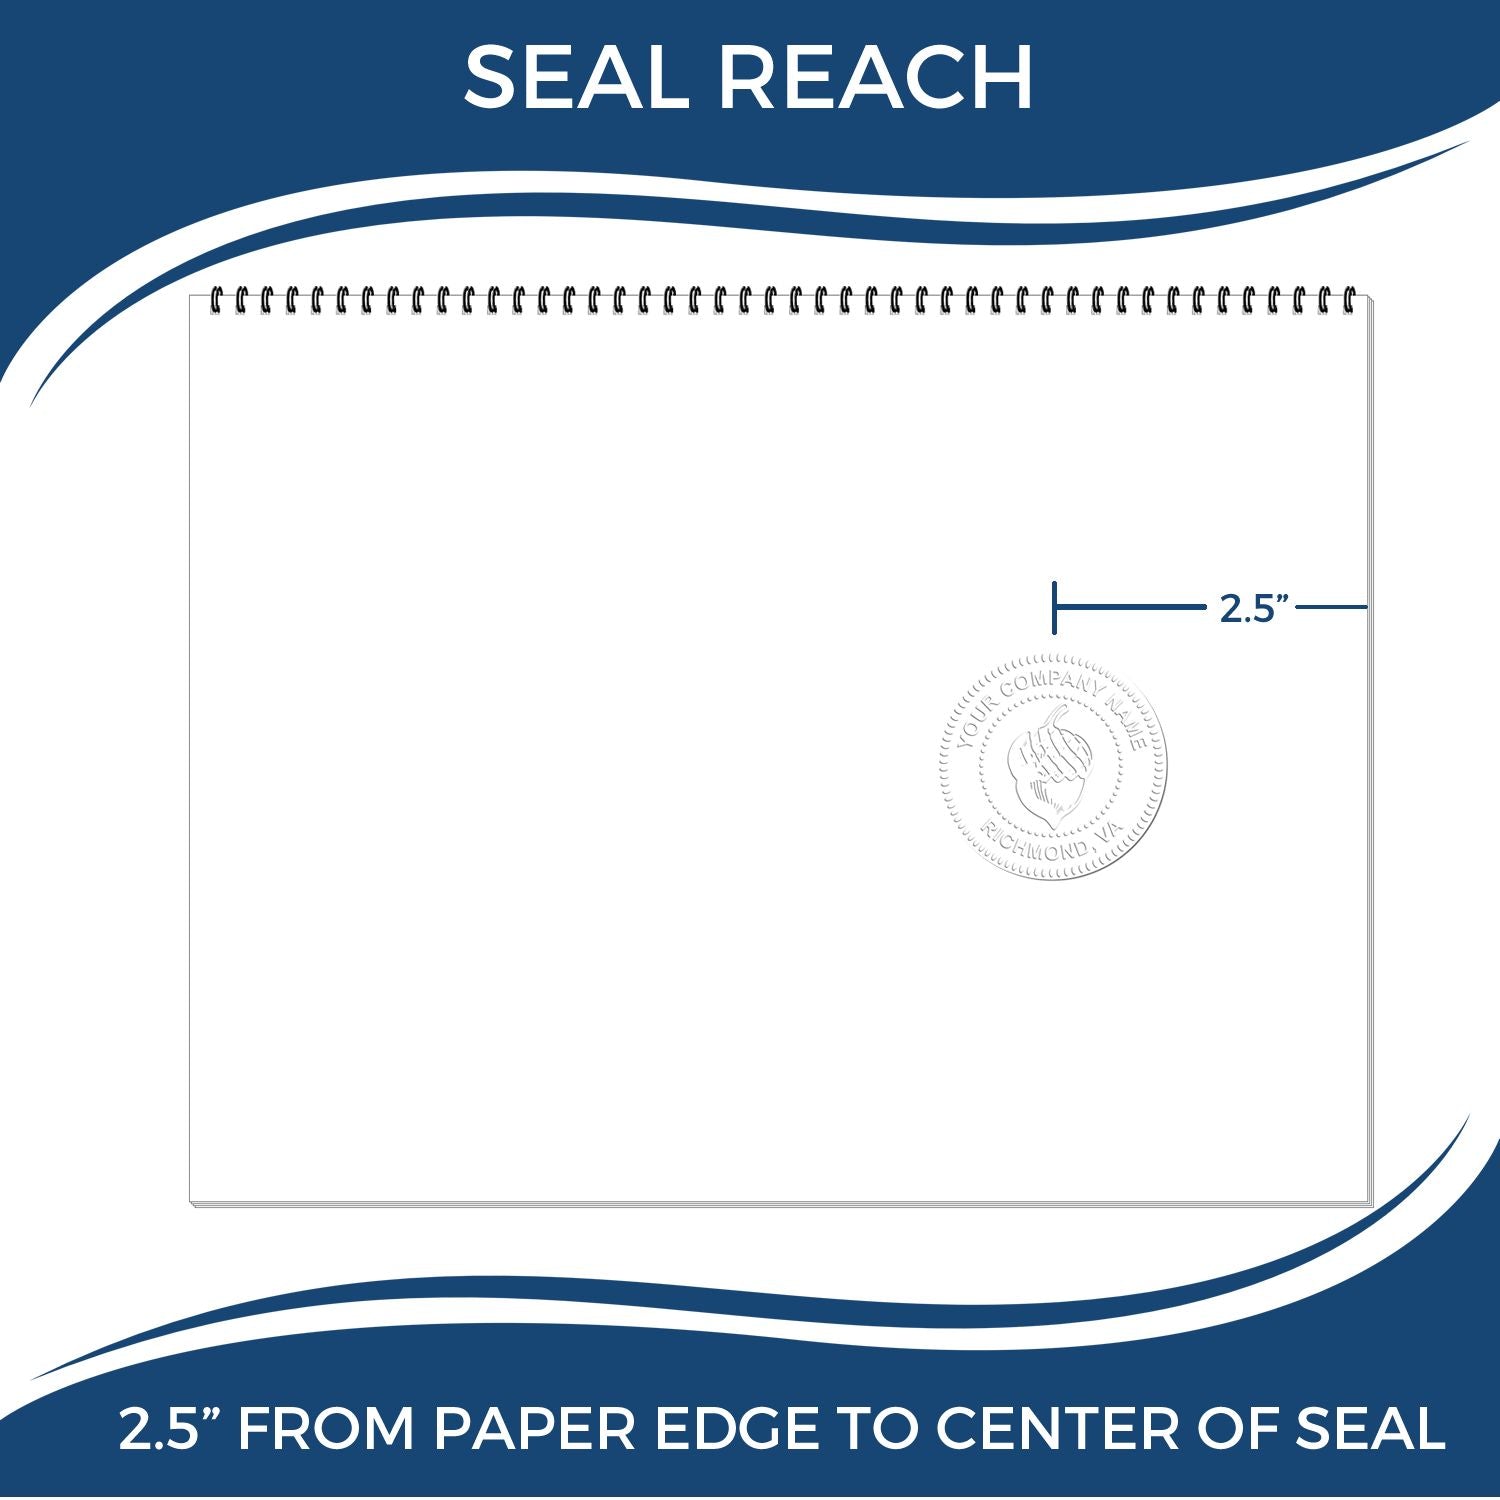 An infographic showing the seal reach which is represented by a ruler and a miniature seal image of the Long Reach District of Columbia Land Surveyor Seal